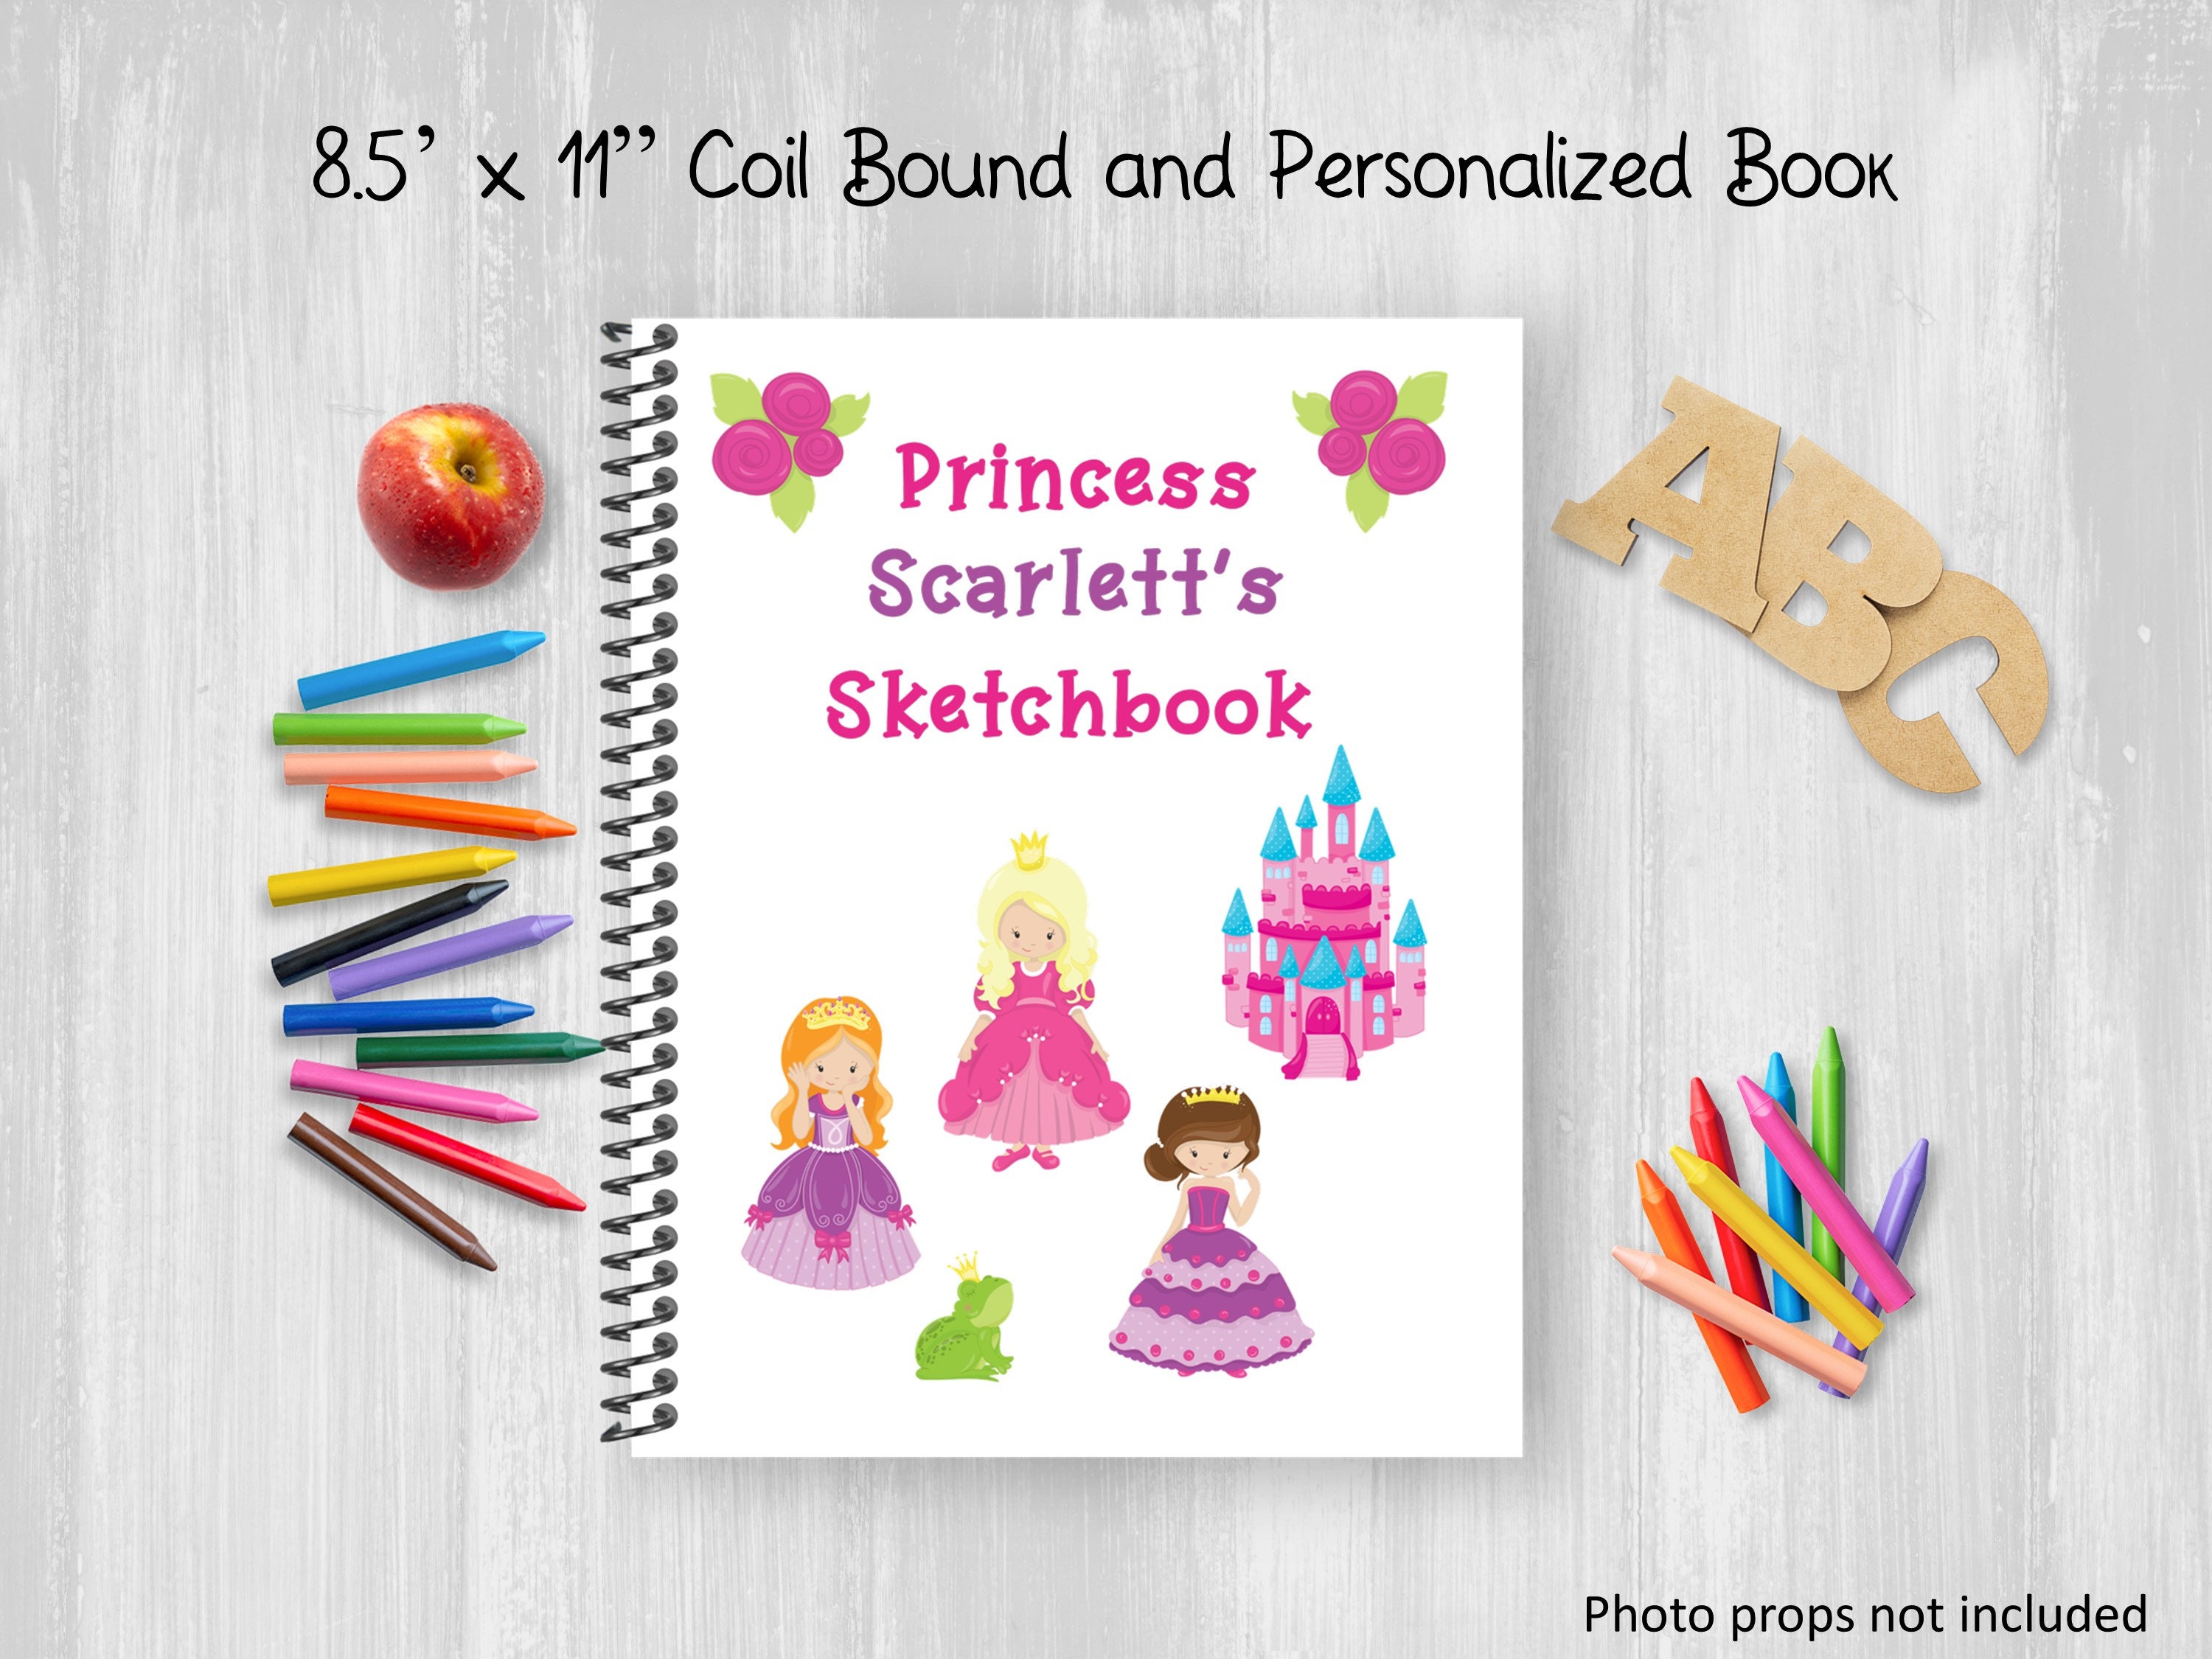 Sketch Book : 8.5 X 11 Cute Sketchbook to Draw in. Large Notebook. 100  pages Perfect for doodling and sketching for kids and teens. Make a cool